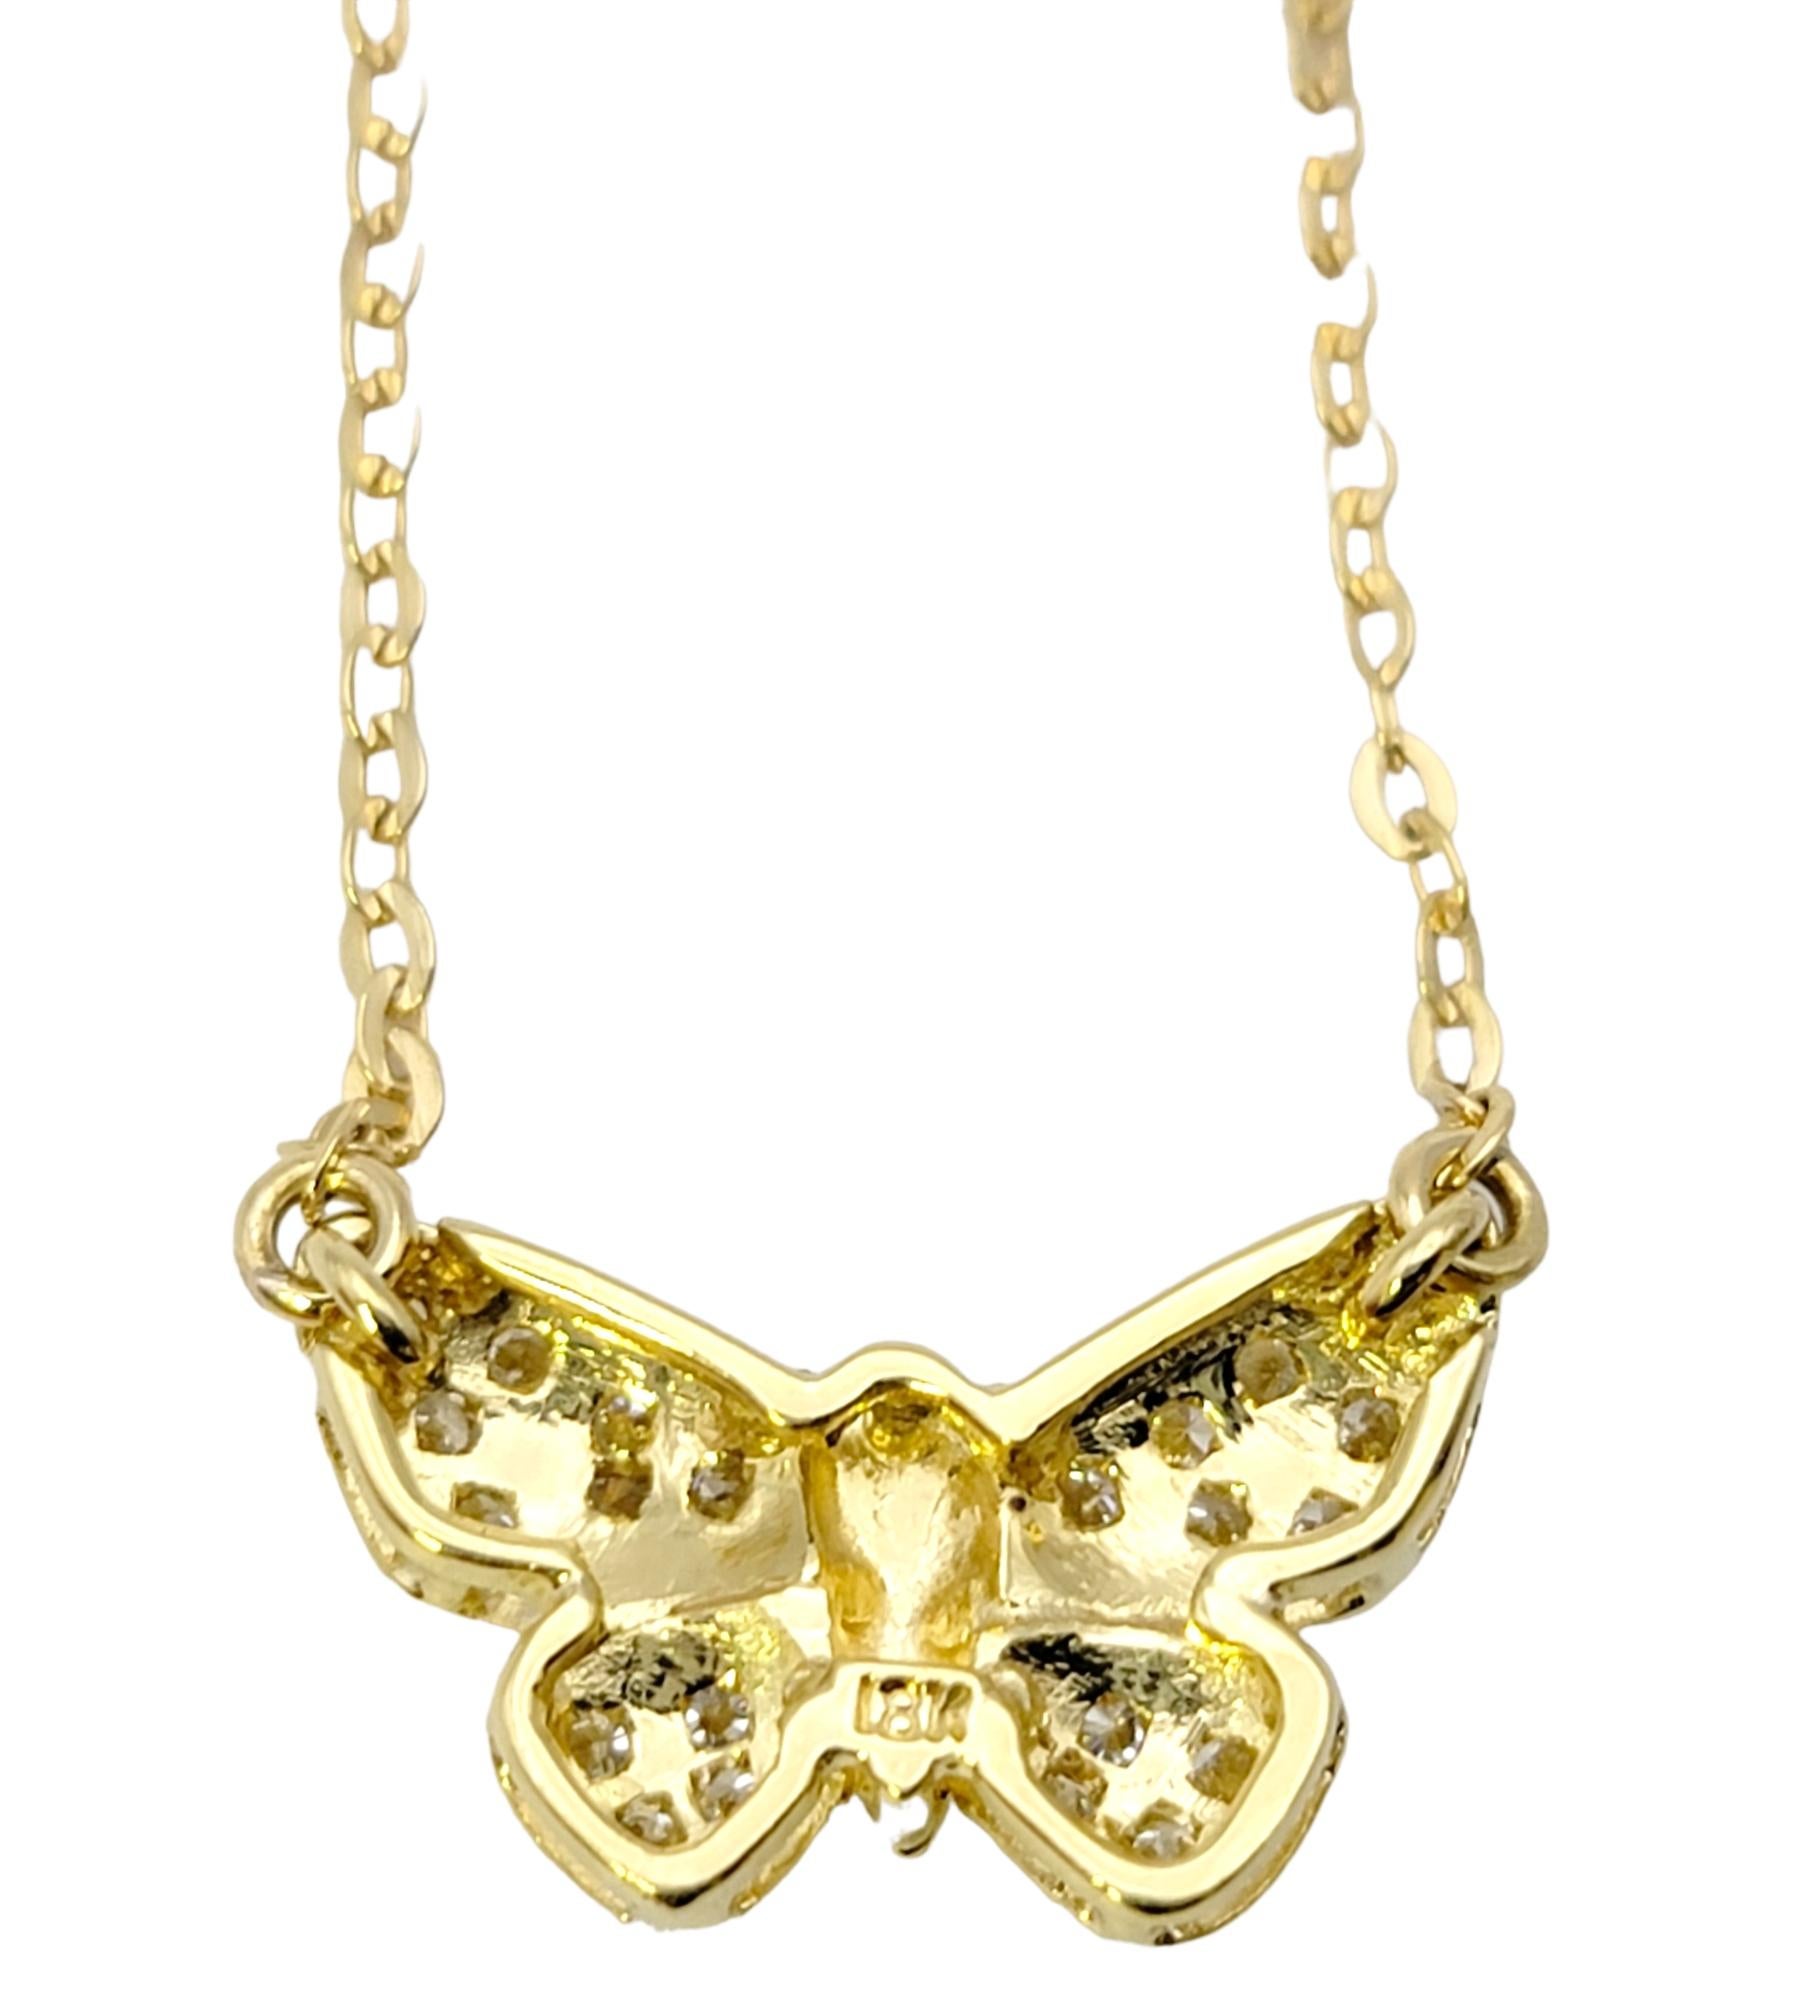 18 Karat Yellow Gold Pave Diamond Butterfly Pendant Necklace For Sale 6